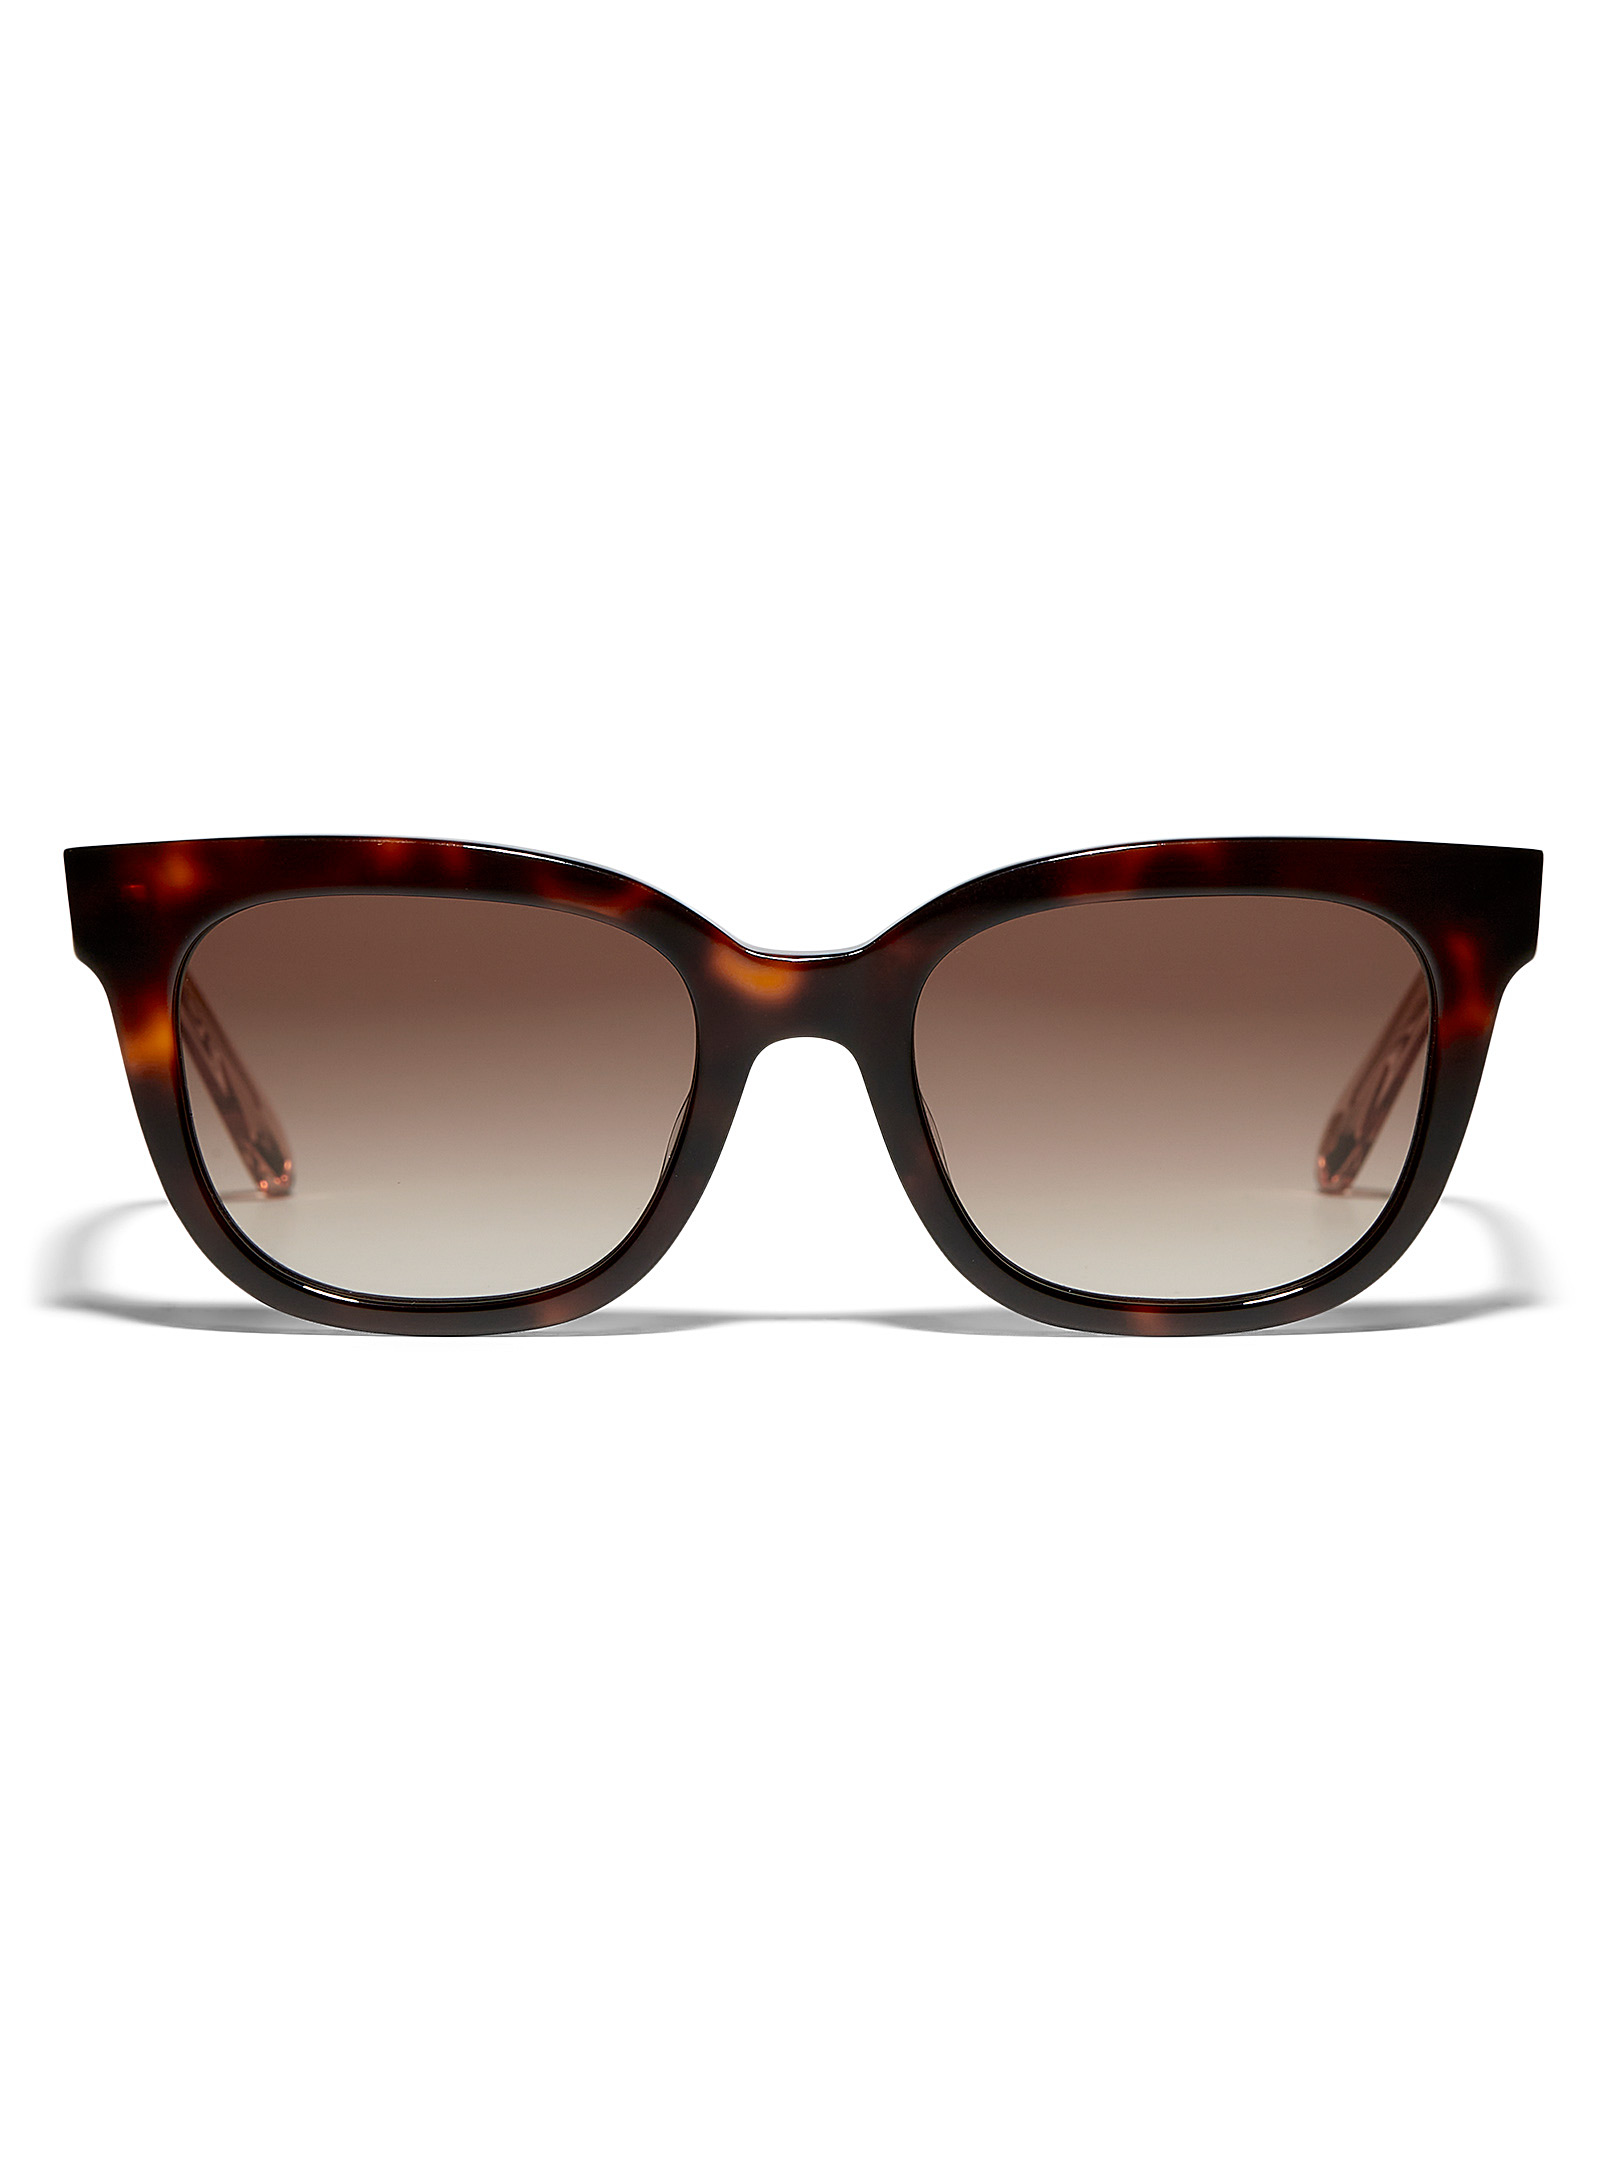 Fossil Embedded Temple Square Sunglasses In Light Brown